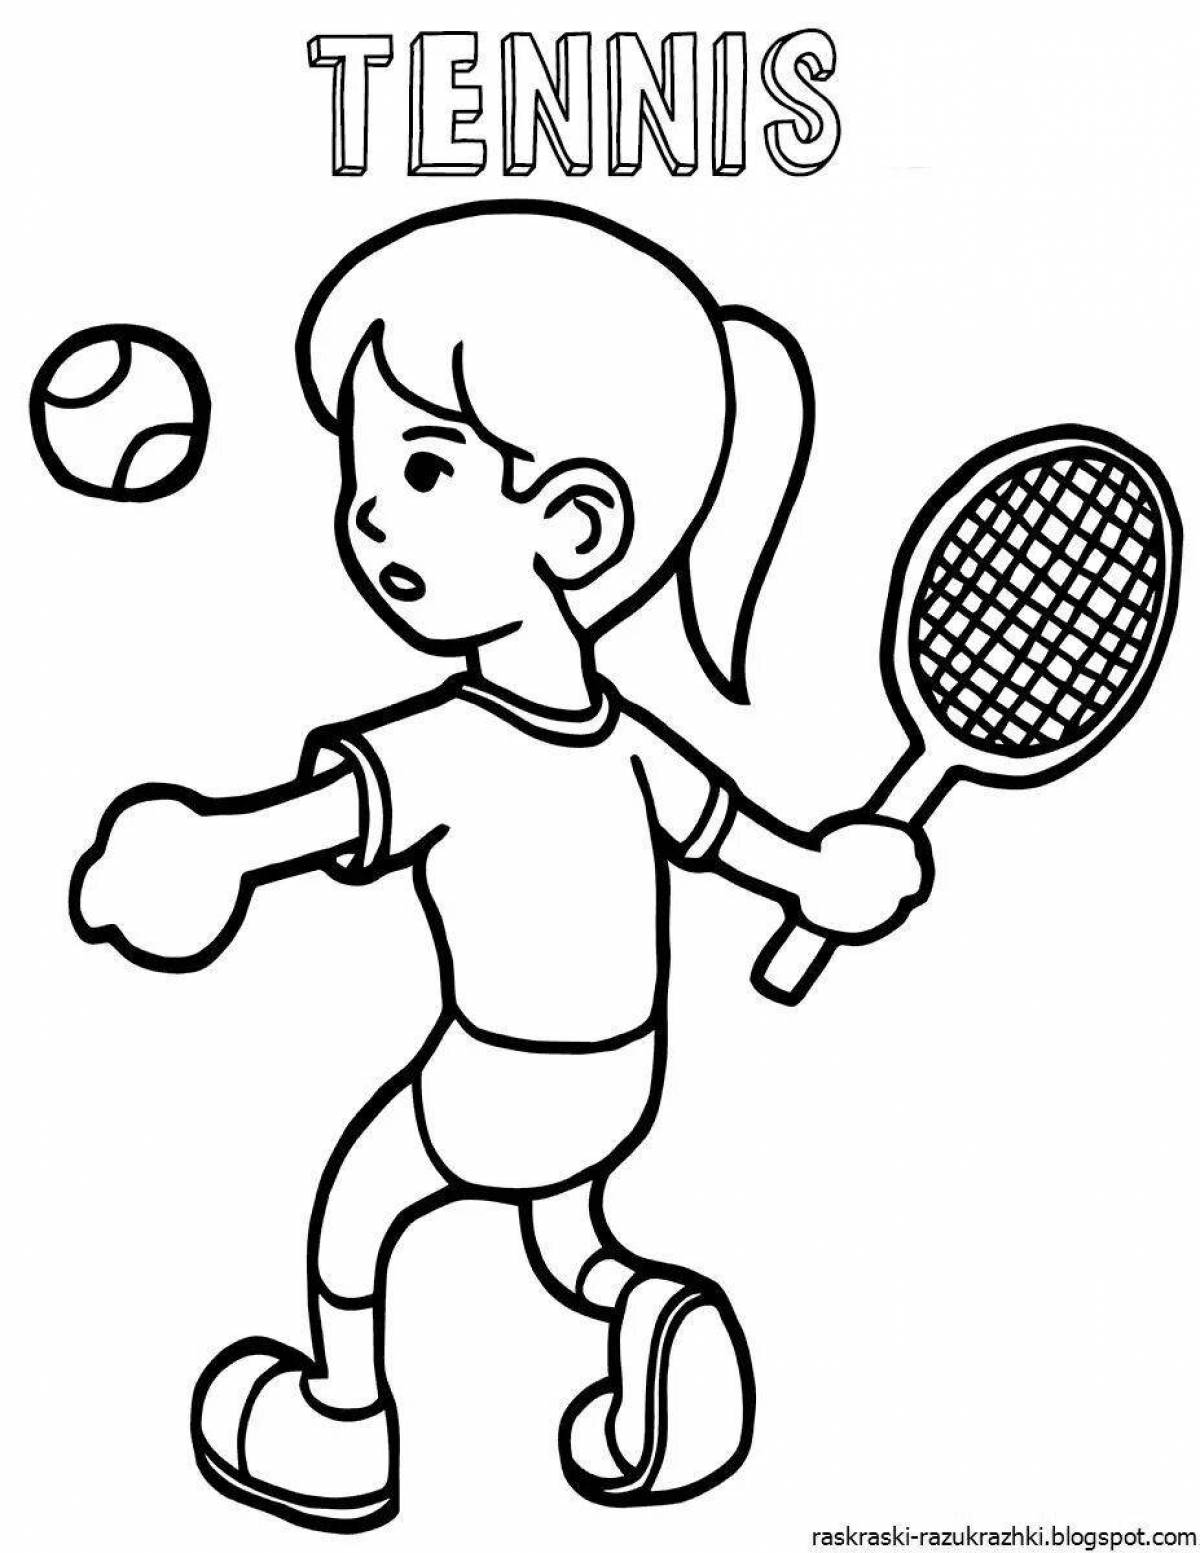 About sports and healthy lifestyle for children #5